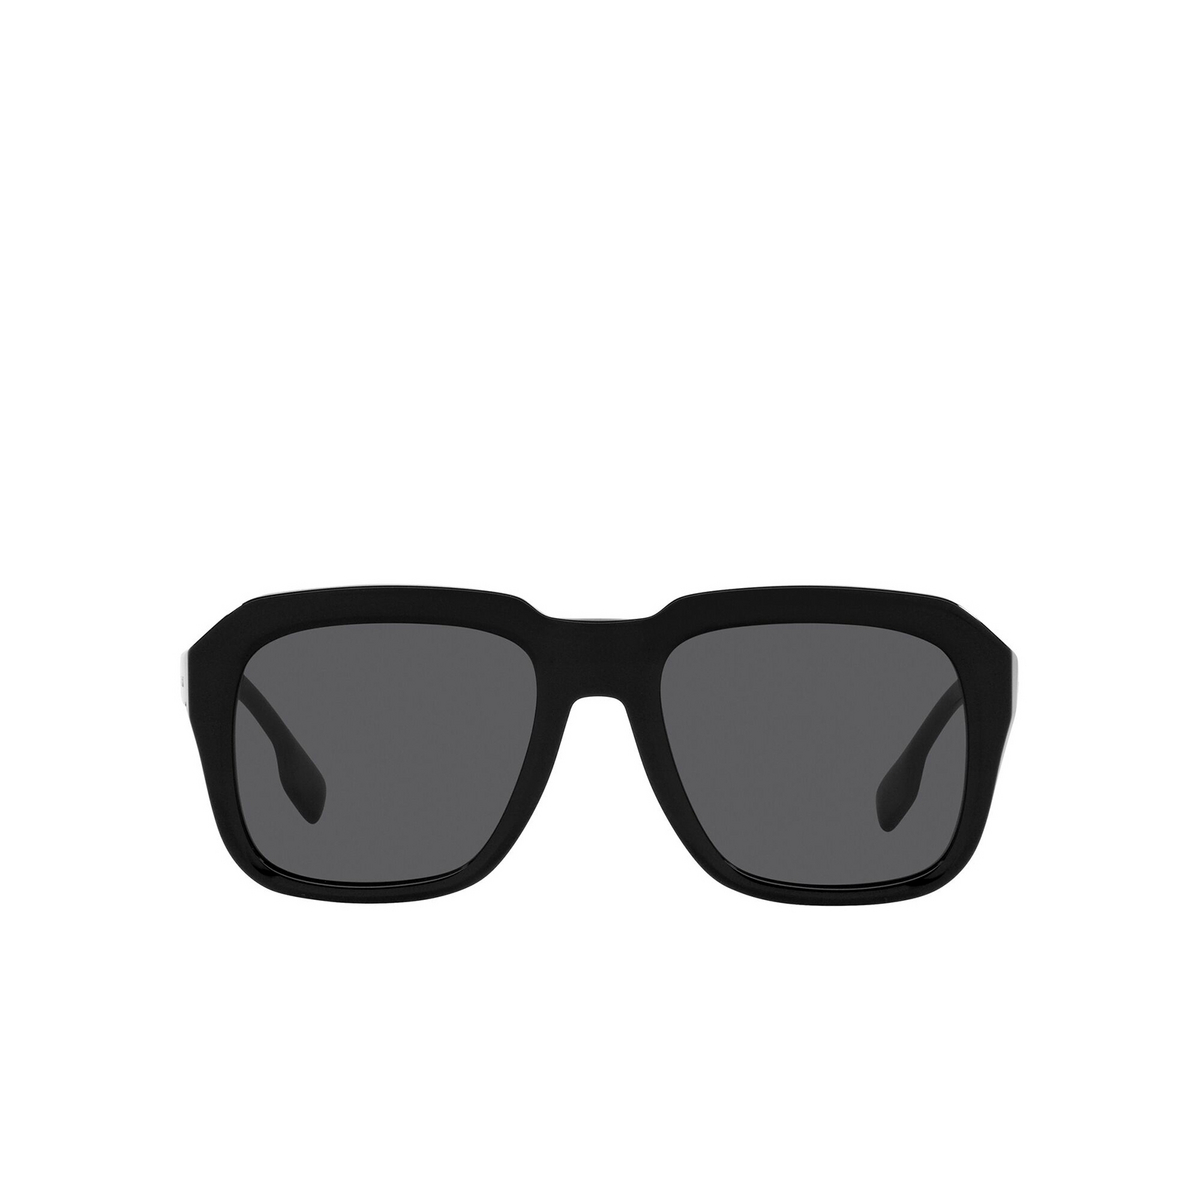 Burberry® Square Sunglasses: BE4350 Astley color 387887 Black - front view